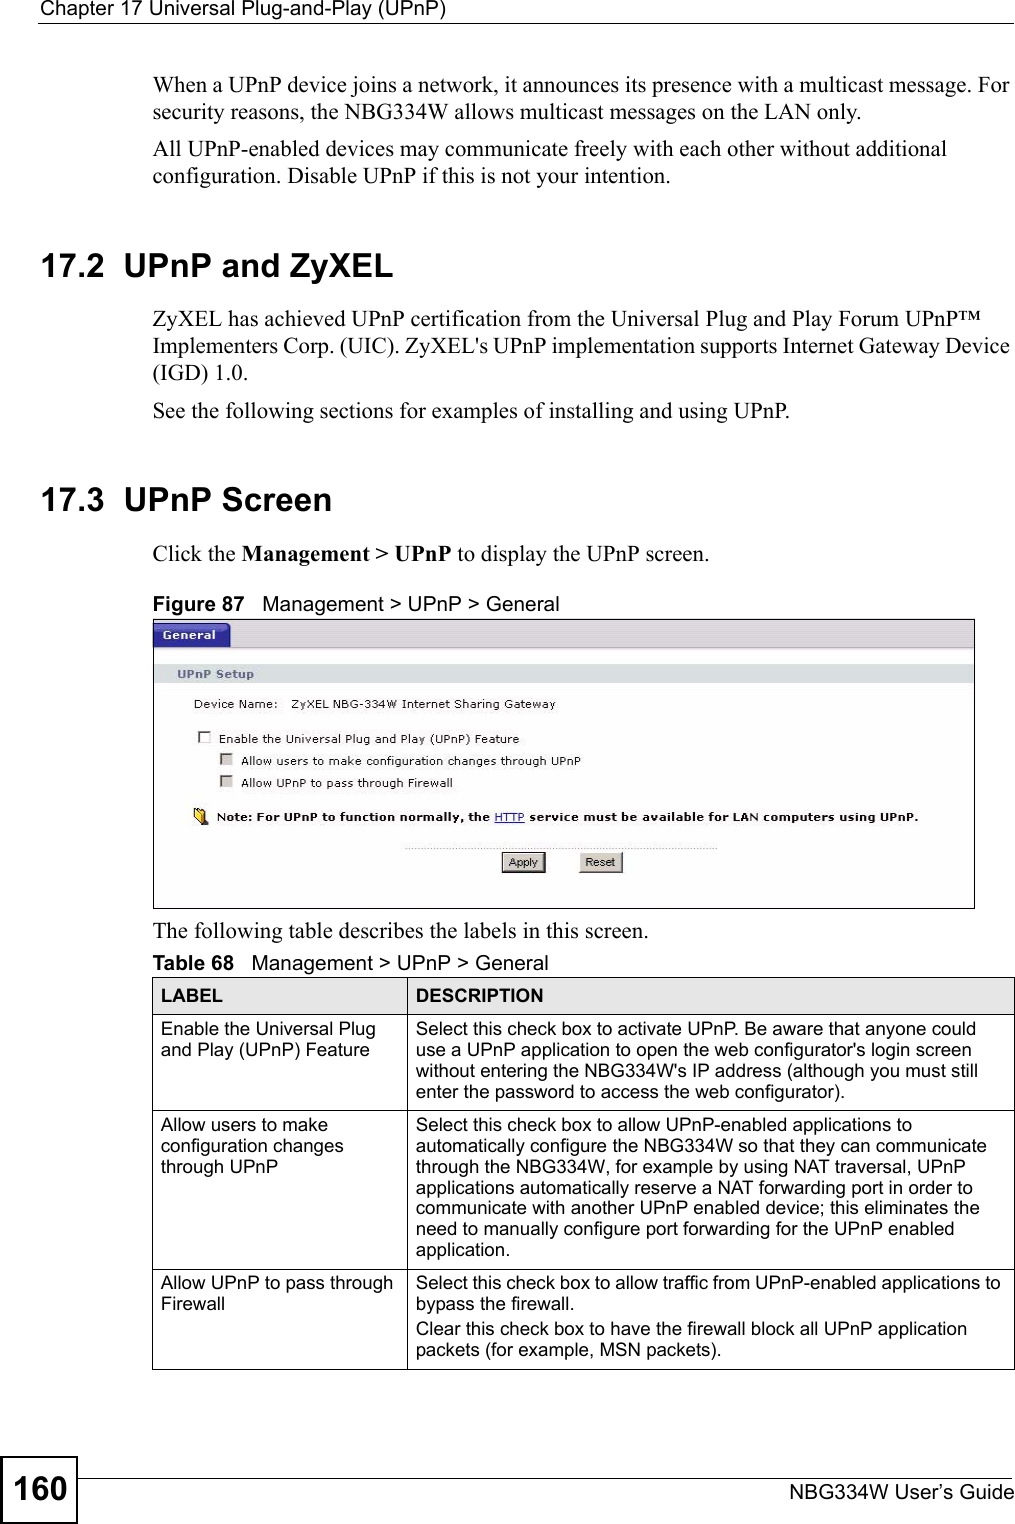 Chapter 17 Universal Plug-and-Play (UPnP)NBG334W User’s Guide160When a UPnP device joins a network, it announces its presence with a multicast message. For security reasons, the NBG334W allows multicast messages on the LAN only.All UPnP-enabled devices may communicate freely with each other without additional configuration. Disable UPnP if this is not your intention. 17.2  UPnP and ZyXELZyXEL has achieved UPnP certification from the Universal Plug and Play Forum UPnP™ Implementers Corp. (UIC). ZyXEL&apos;s UPnP implementation supports Internet Gateway Device (IGD) 1.0. See the following sections for examples of installing and using UPnP.17.3  UPnP ScreenClick the Management &gt; UPnP to display the UPnP screen.Figure 87   Management &gt; UPnP &gt; General The following table describes the labels in this screen. Table 68   Management &gt; UPnP &gt; GeneralLABEL DESCRIPTIONEnable the Universal Plug and Play (UPnP) FeatureSelect this check box to activate UPnP. Be aware that anyone could use a UPnP application to open the web configurator&apos;s login screen without entering the NBG334W&apos;s IP address (although you must still enter the password to access the web configurator).Allow users to make configuration changes through UPnPSelect this check box to allow UPnP-enabled applications to automatically configure the NBG334W so that they can communicate through the NBG334W, for example by using NAT traversal, UPnP applications automatically reserve a NAT forwarding port in order to communicate with another UPnP enabled device; this eliminates the need to manually configure port forwarding for the UPnP enabled application. Allow UPnP to pass through FirewallSelect this check box to allow traffic from UPnP-enabled applications to bypass the firewall. Clear this check box to have the firewall block all UPnP application packets (for example, MSN packets).